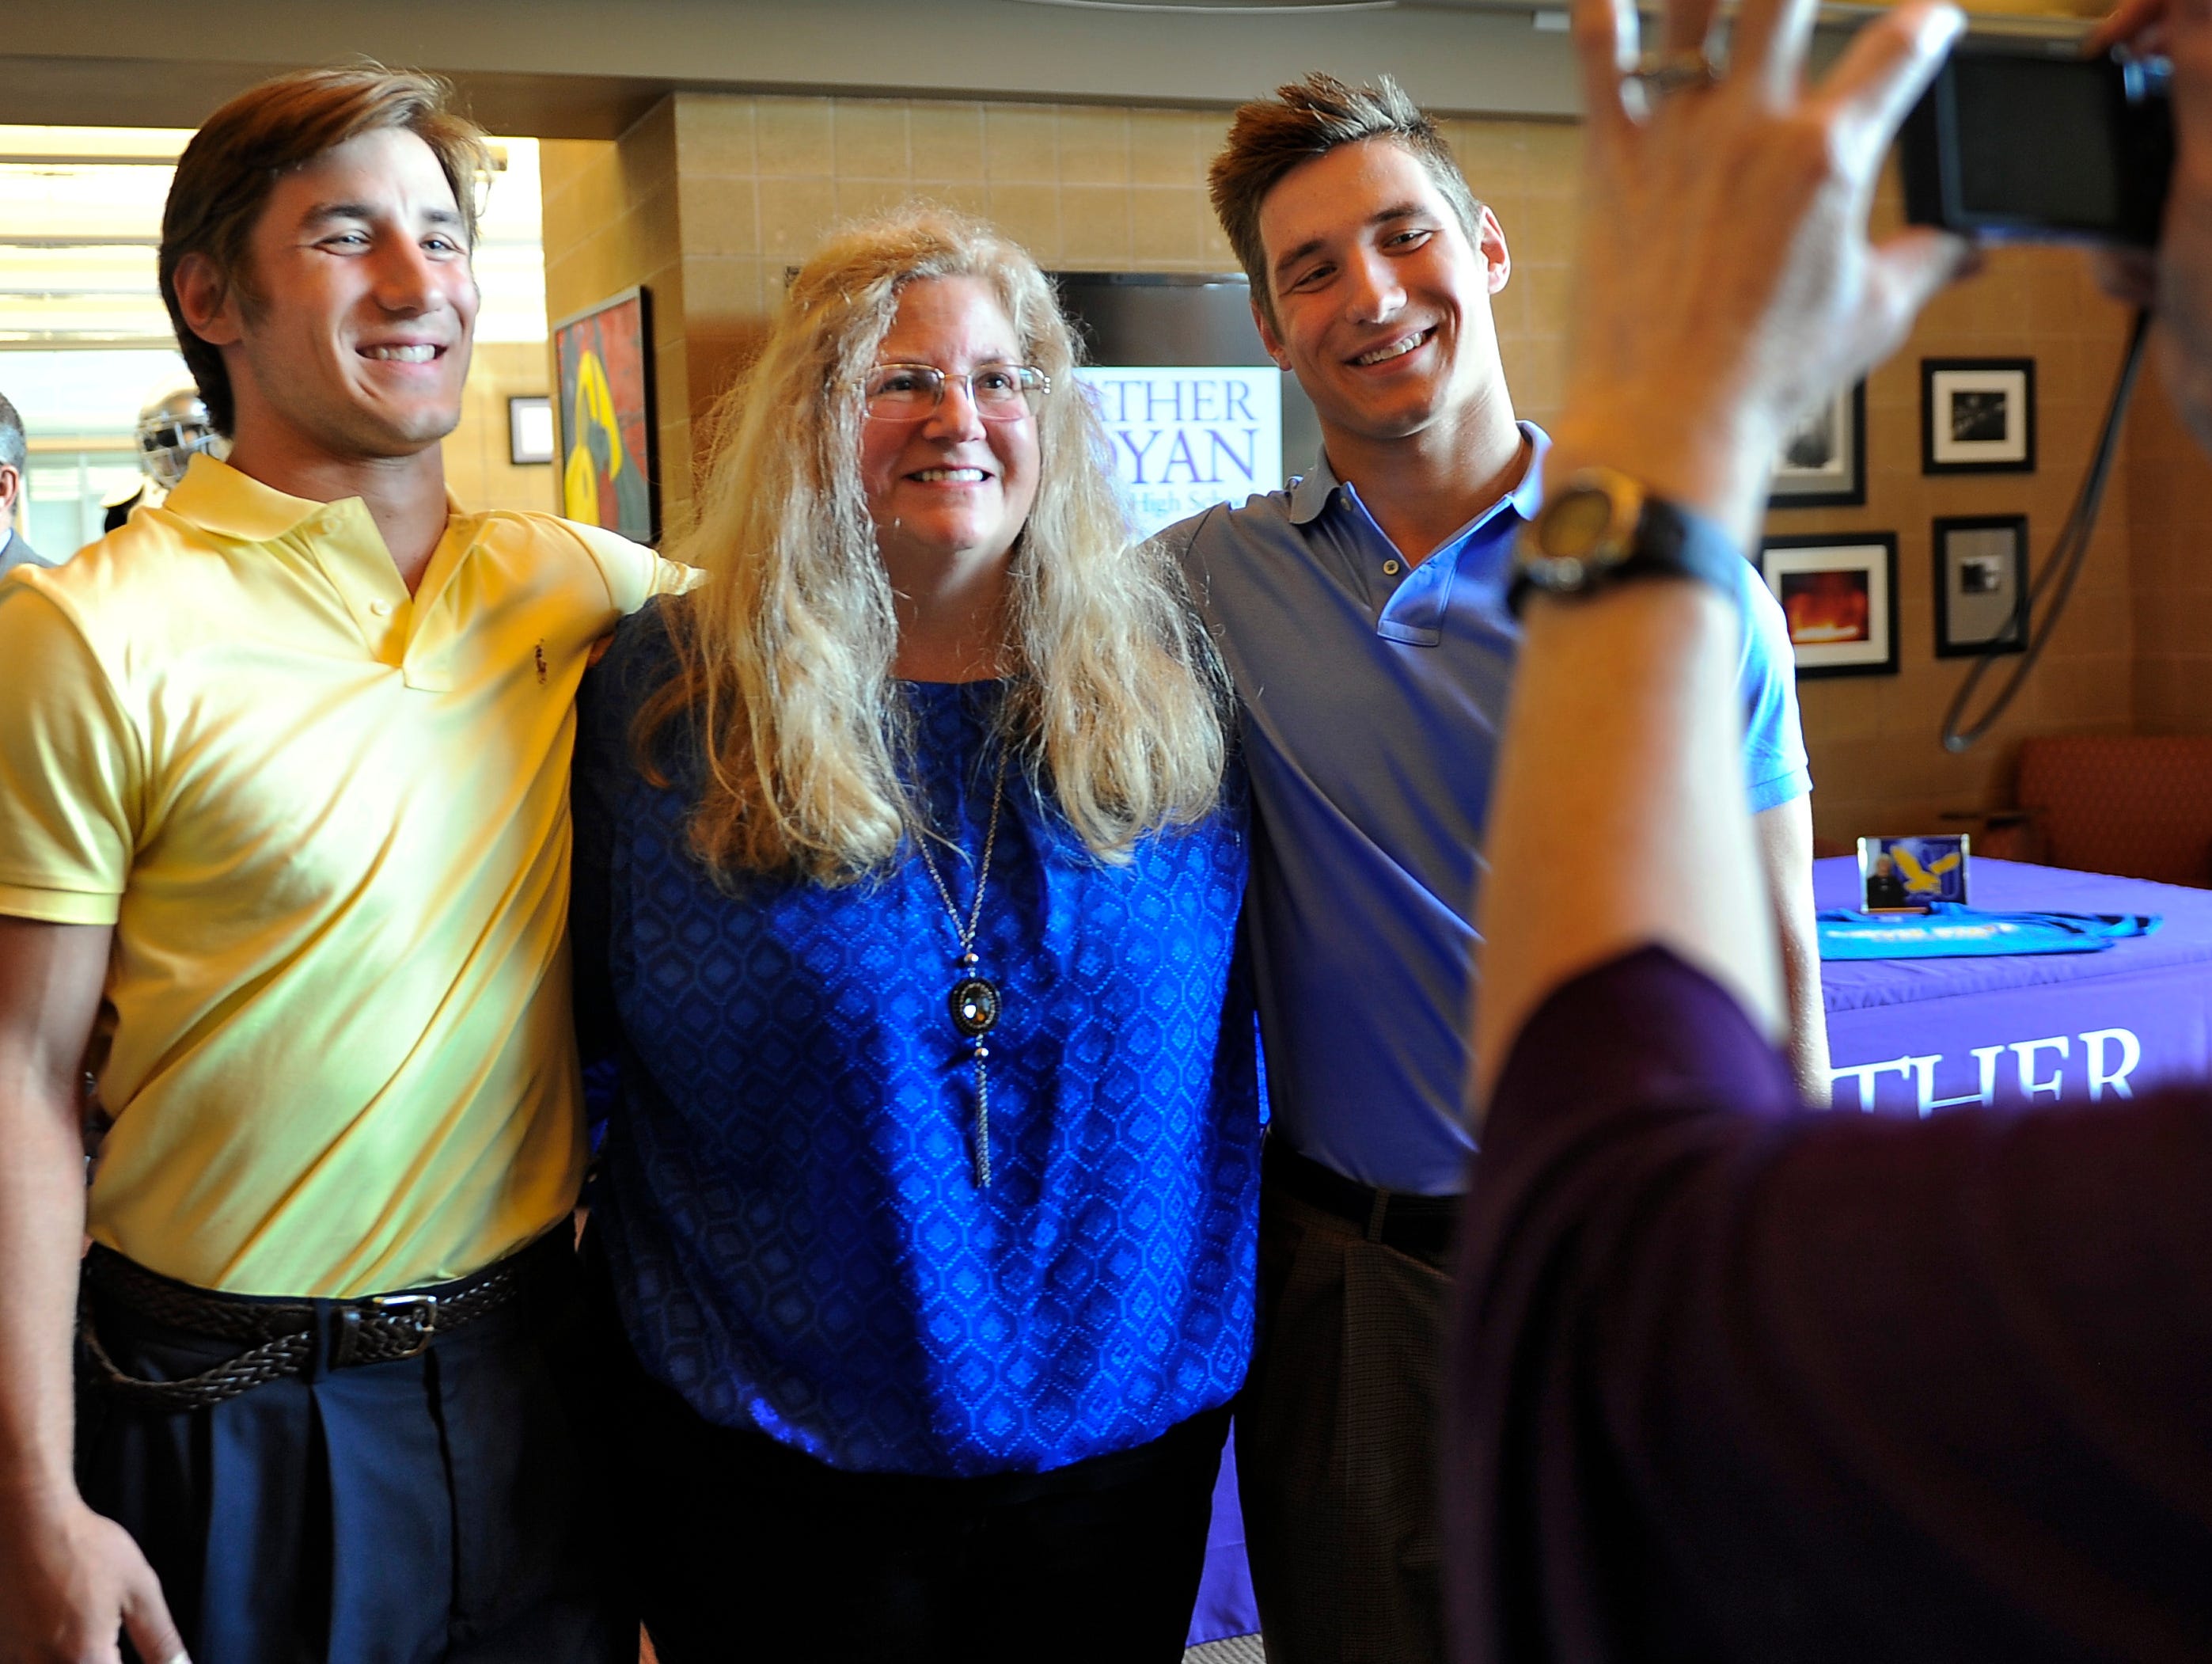 Twins Andrew, left, and John O’Dwyer pose for a picture with their mother Alice O’Dwyer before they sign their letters of intent to attend Coppin State University together at Father Ryan High School on Wednesday, May 6.